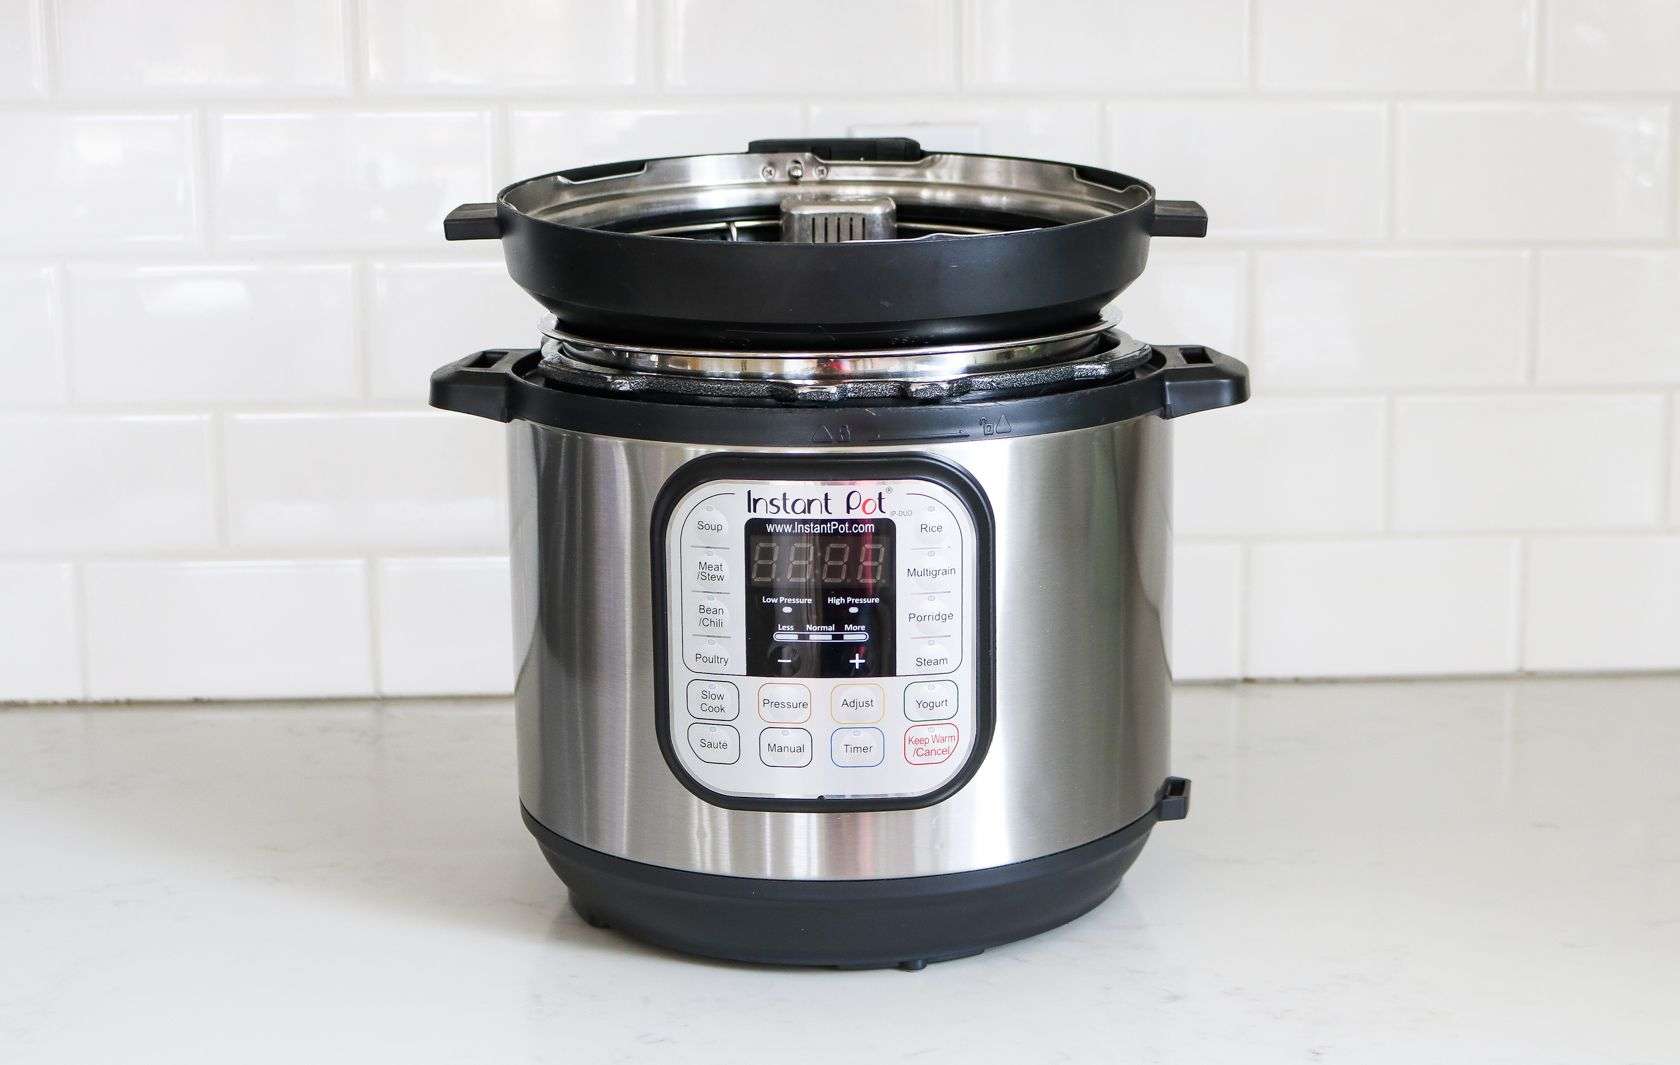 How to Clean Instant Pot 101